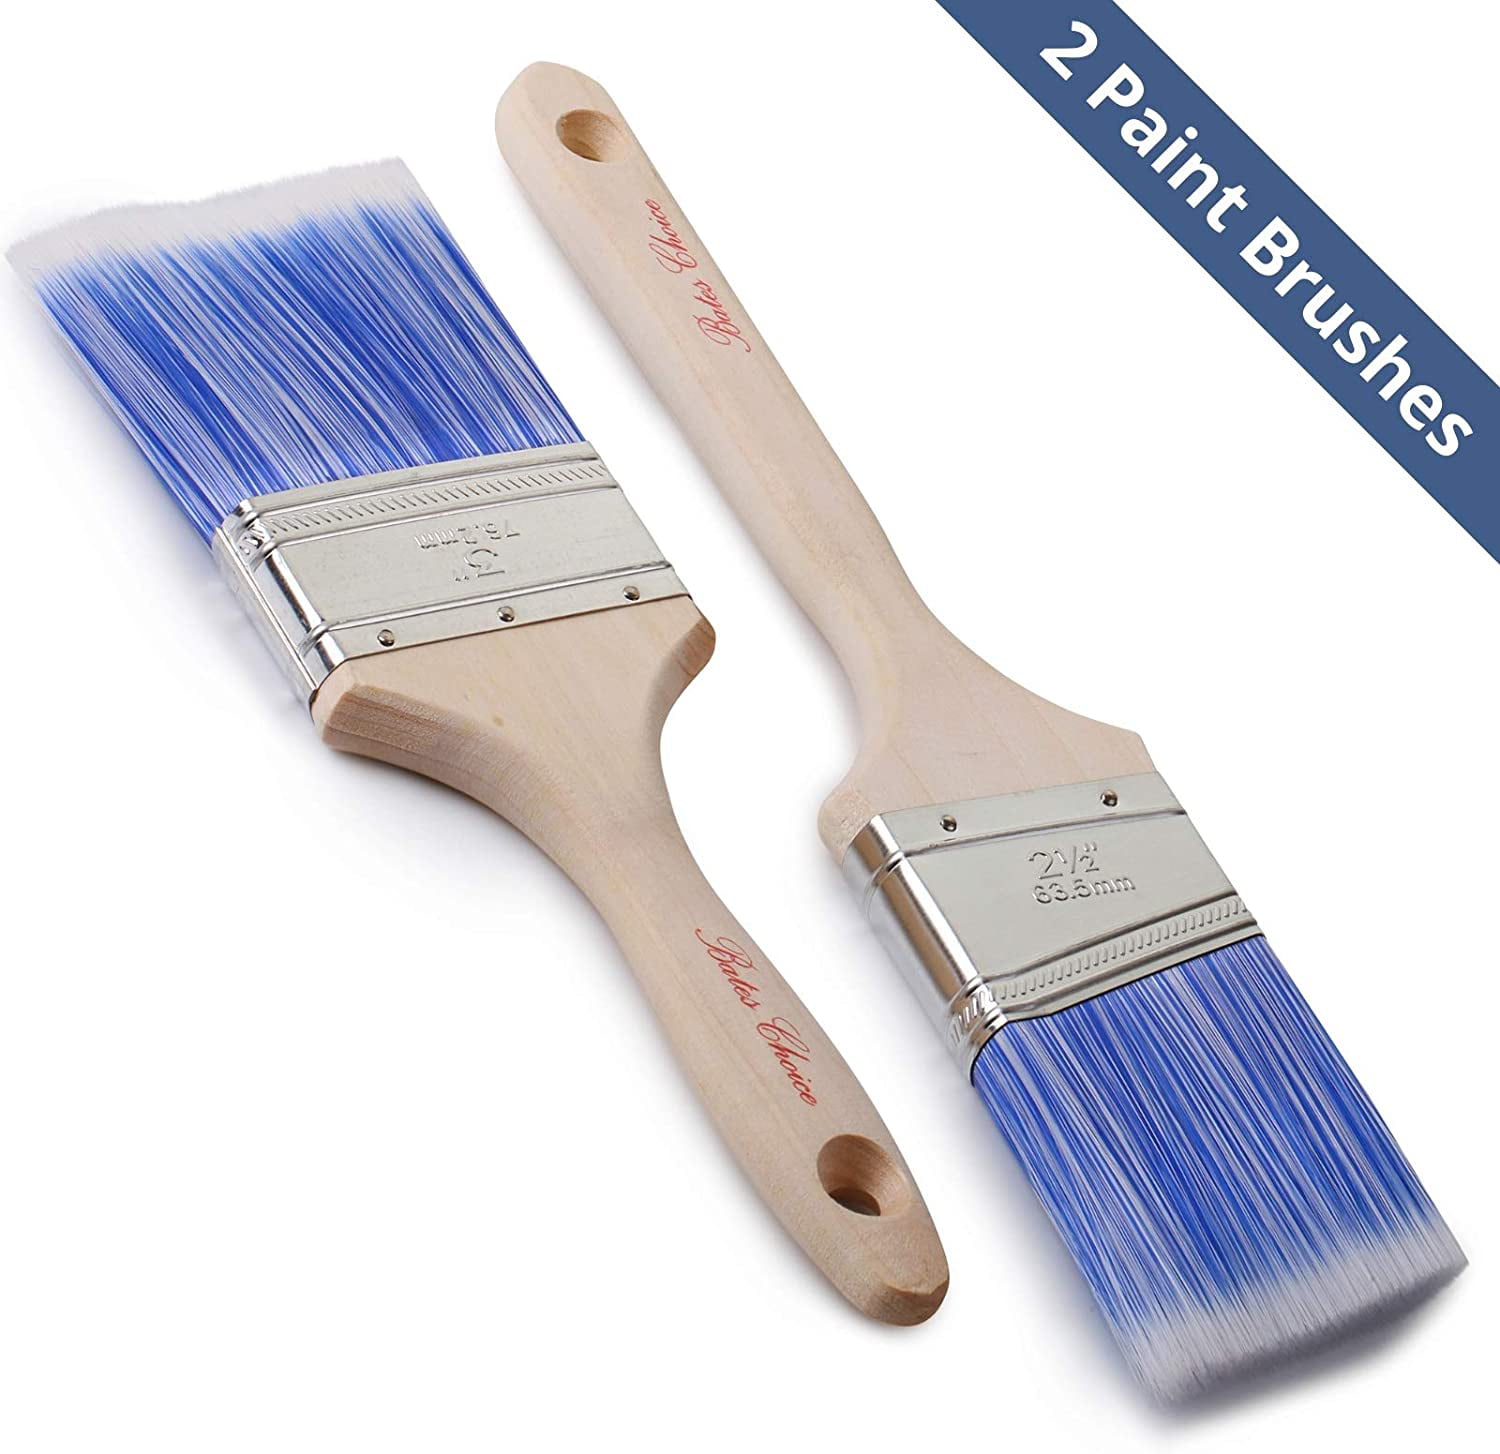 2 Bates Paint Brushes and 1.5 Angled Treated Wood Handle, 2.5 4 Pieces 3 